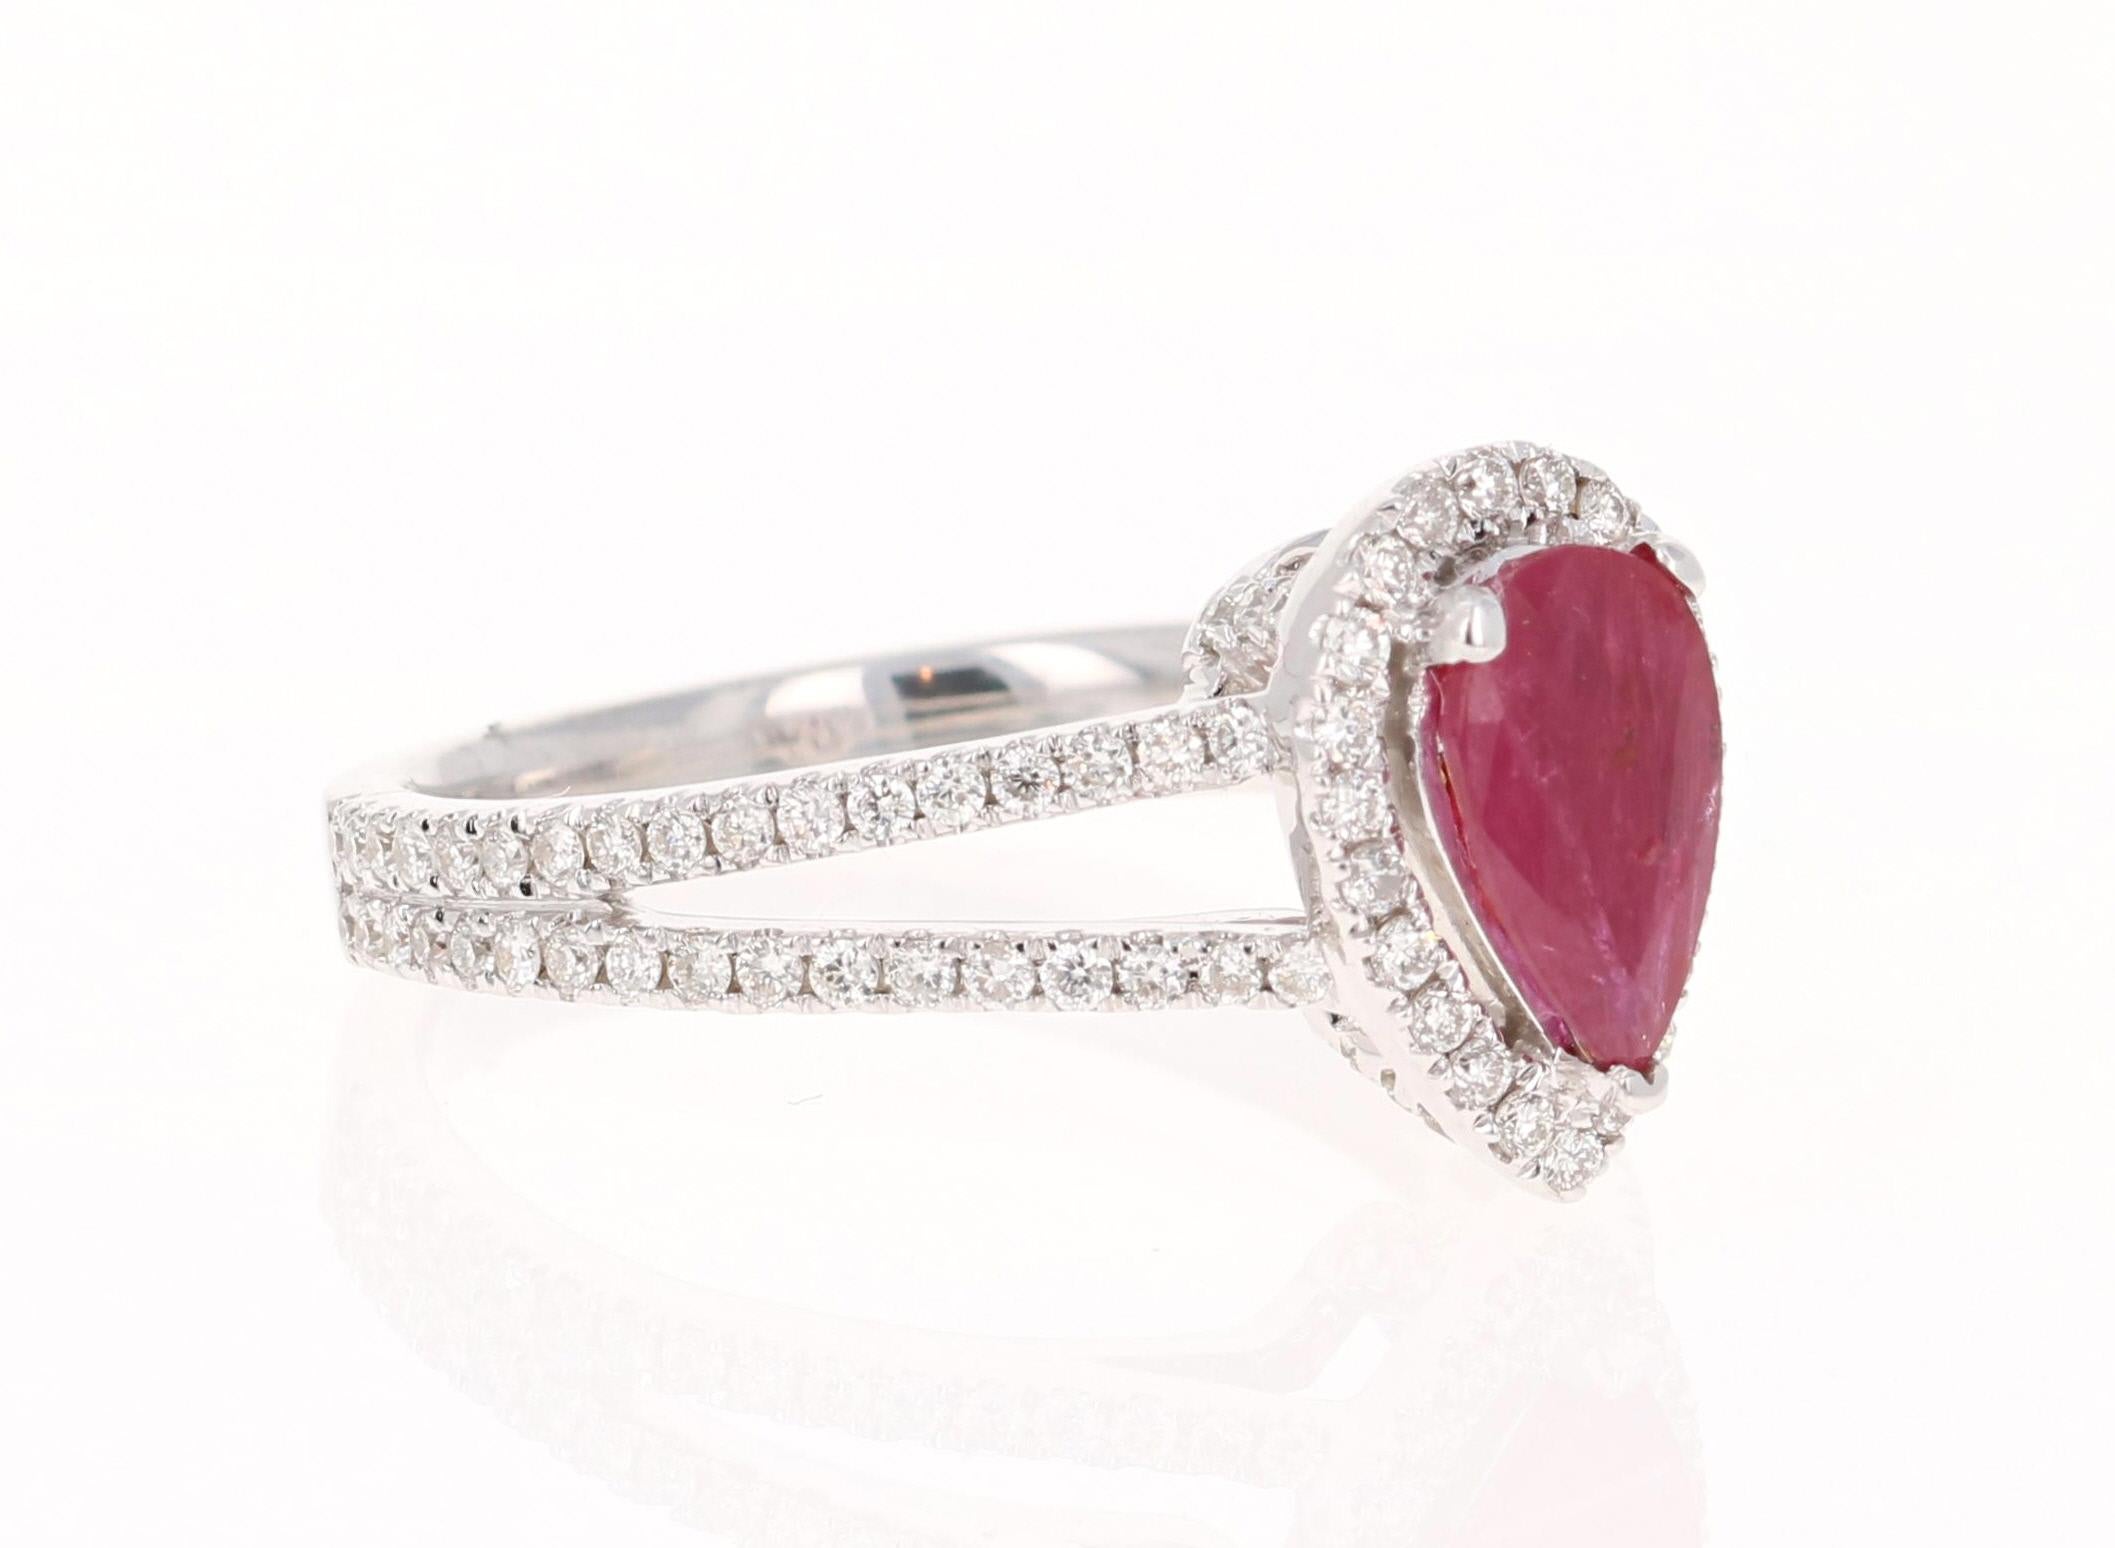 This is simply a beautiful Pear Cut Ruby and Diamond ring. The Pear Cut Ruby measures at 5 mm x 8 mm and the face of the ring measures at 8 mm x 12 mm. It weighs 0.96 Carats and is surrounded by 99 Round Cut Diamonds that weigh 0.54 Carats.